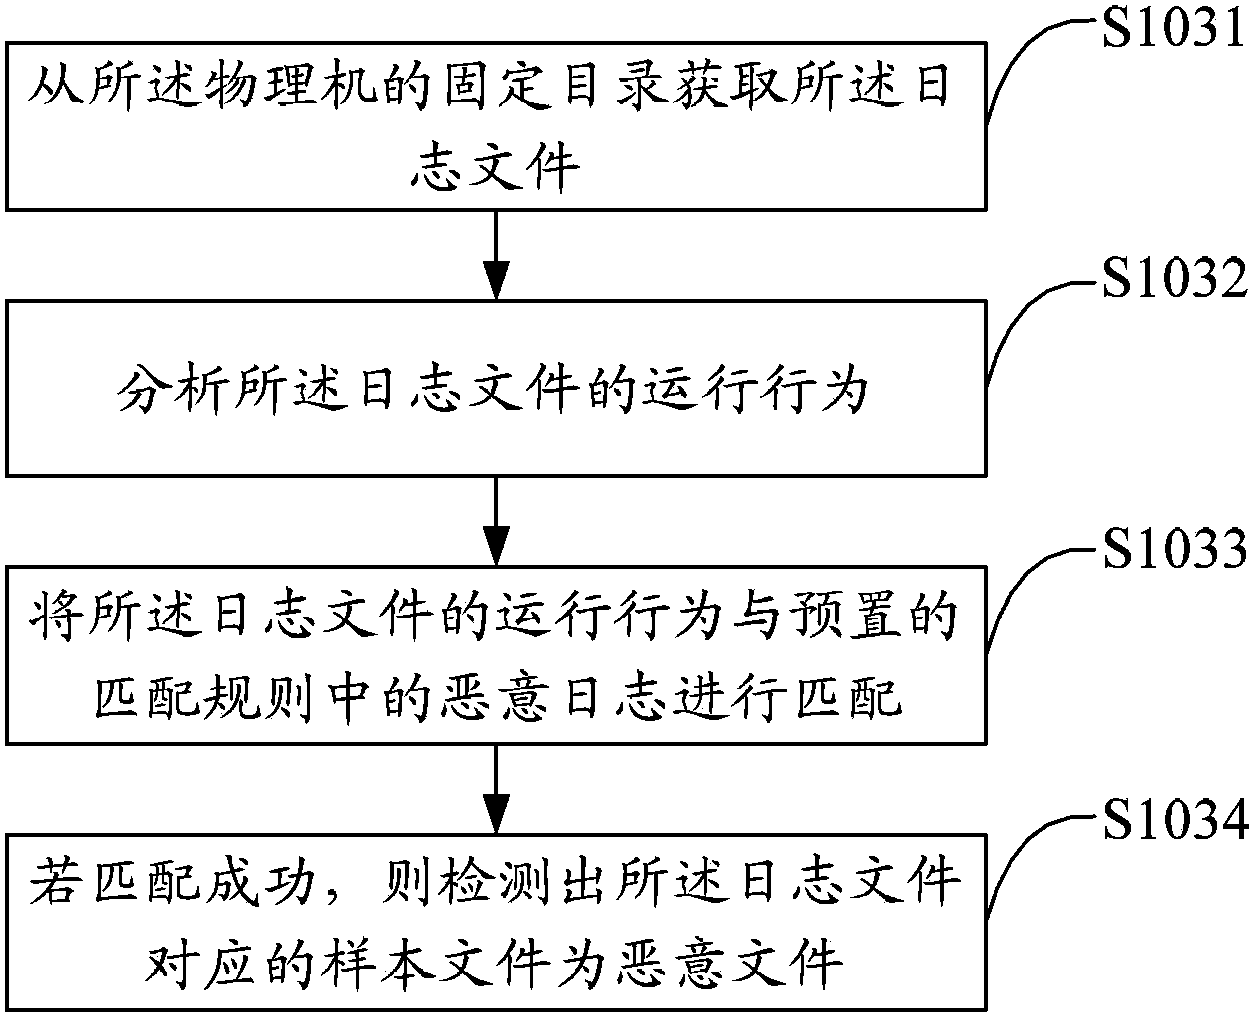 Malicious file detection method and device